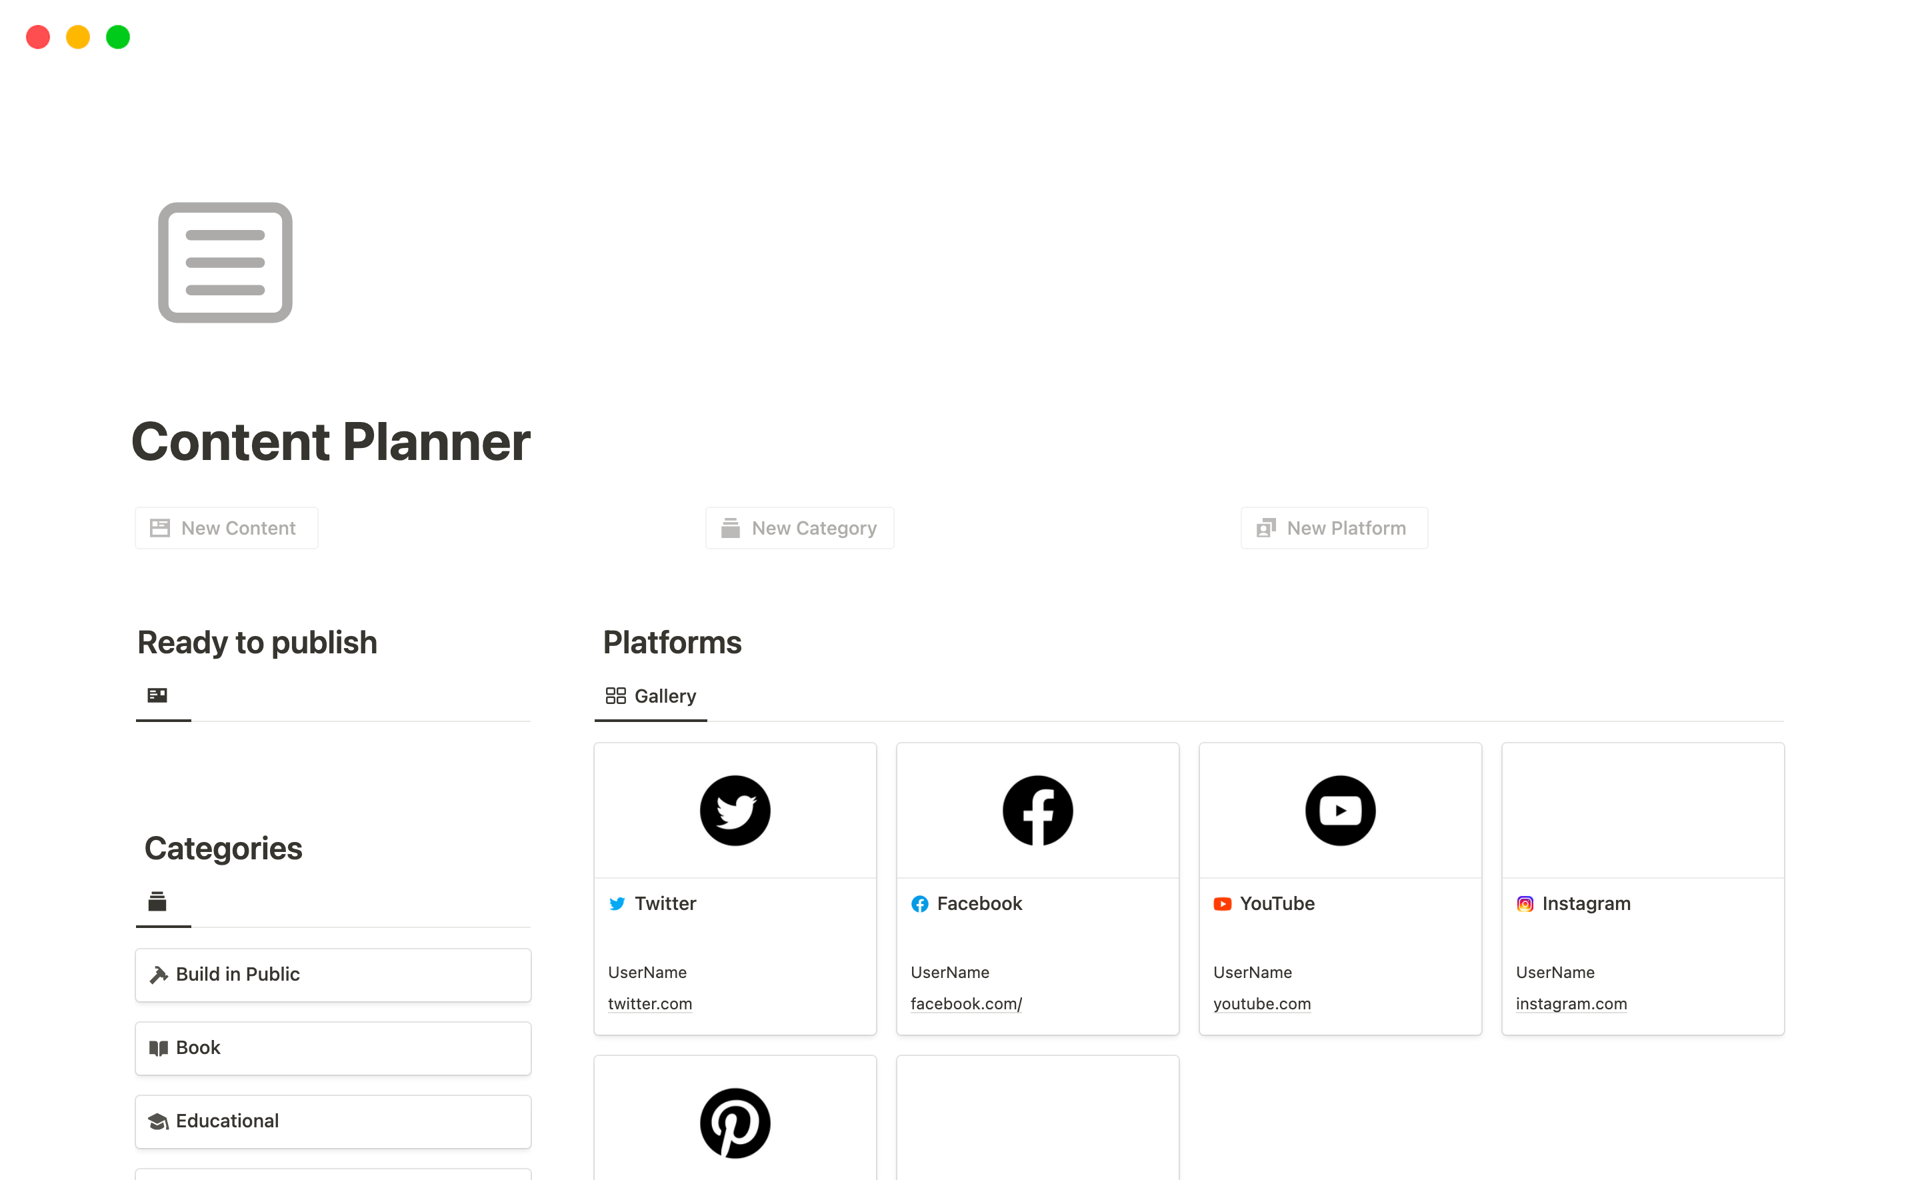 An all-in-one Notion content planner template that streamlines your content creation process, organizes ideas, and schedules publishing for efficient and successful content management.